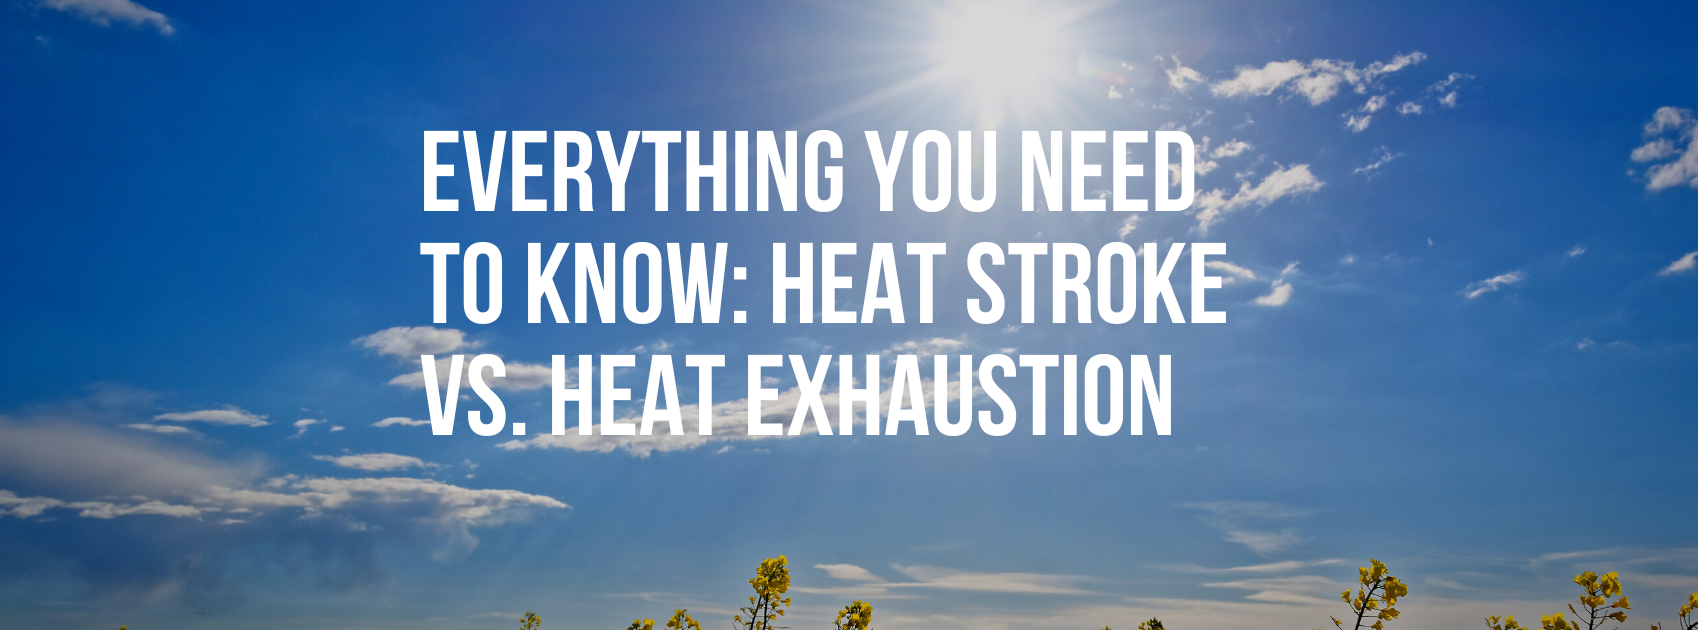 Surviving Summer: Heat Stroke vs. Heat Exhaustion - Know the Difference